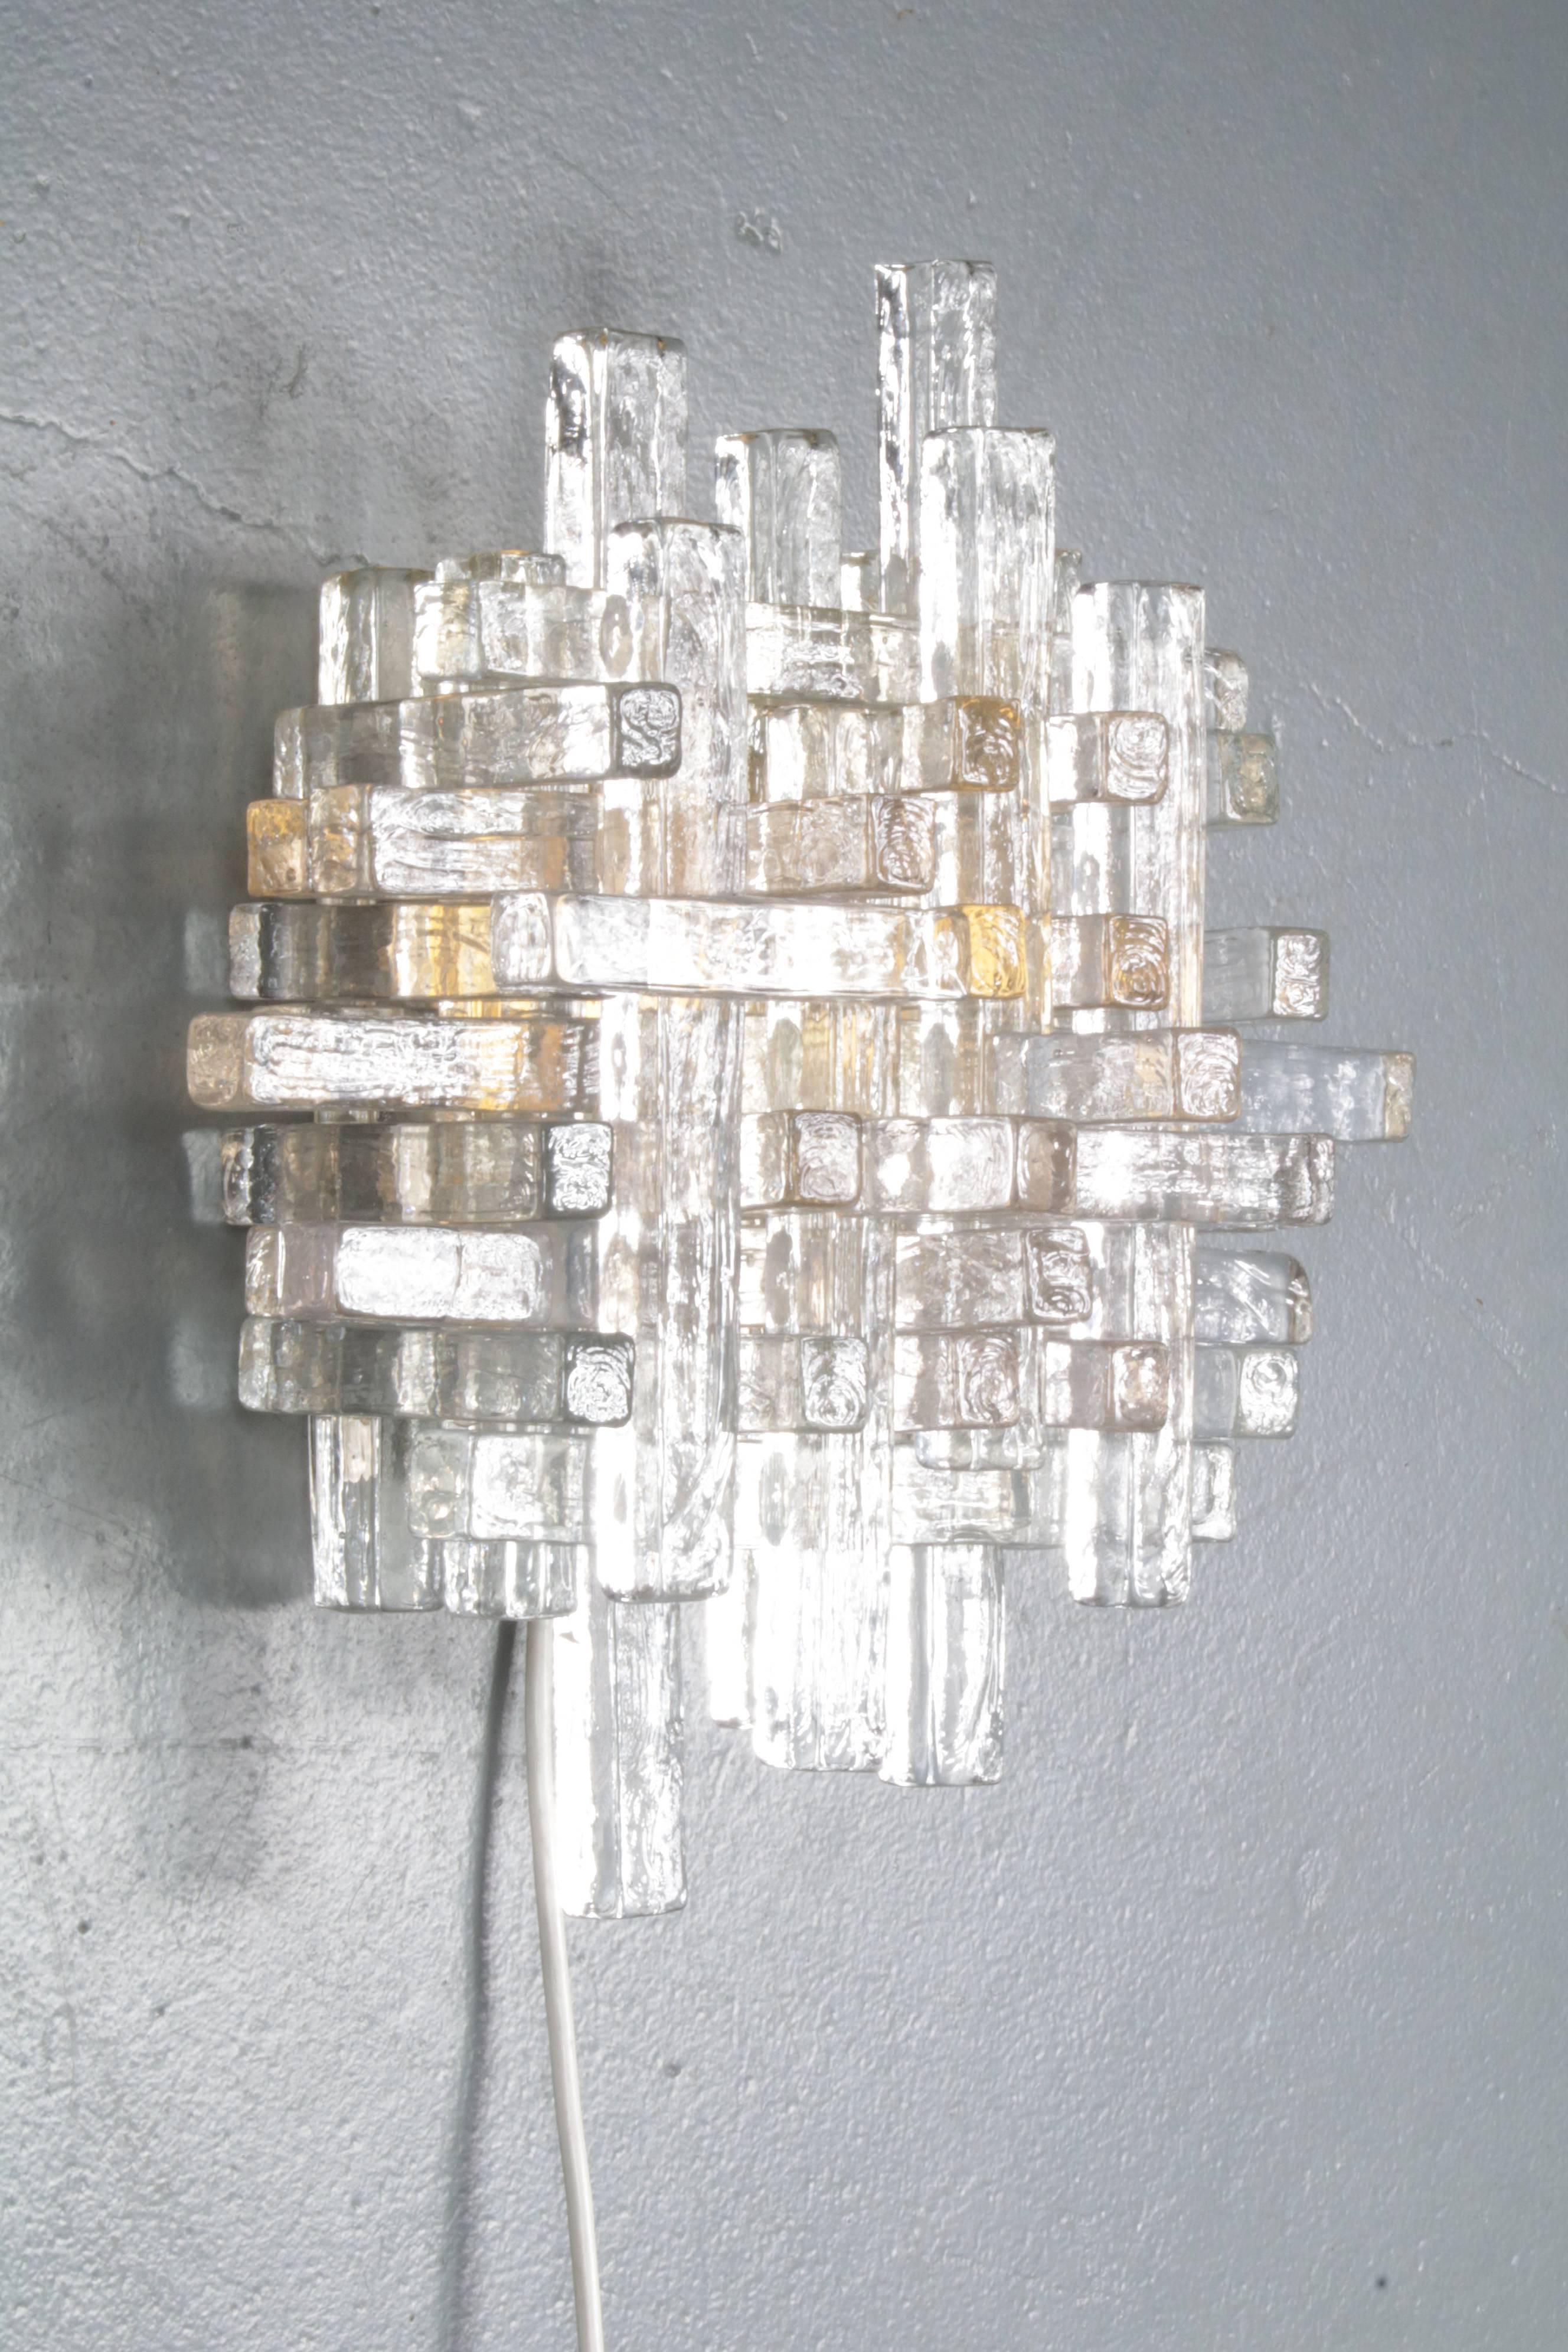 A beautiful glass wall sconce manufactured by Poliarte in Italy, circa 1960.

This piece is made of many clear glass rectangular shapes, placed in different positions creating the eye-catching artistic style that Poliarte is famously known form.